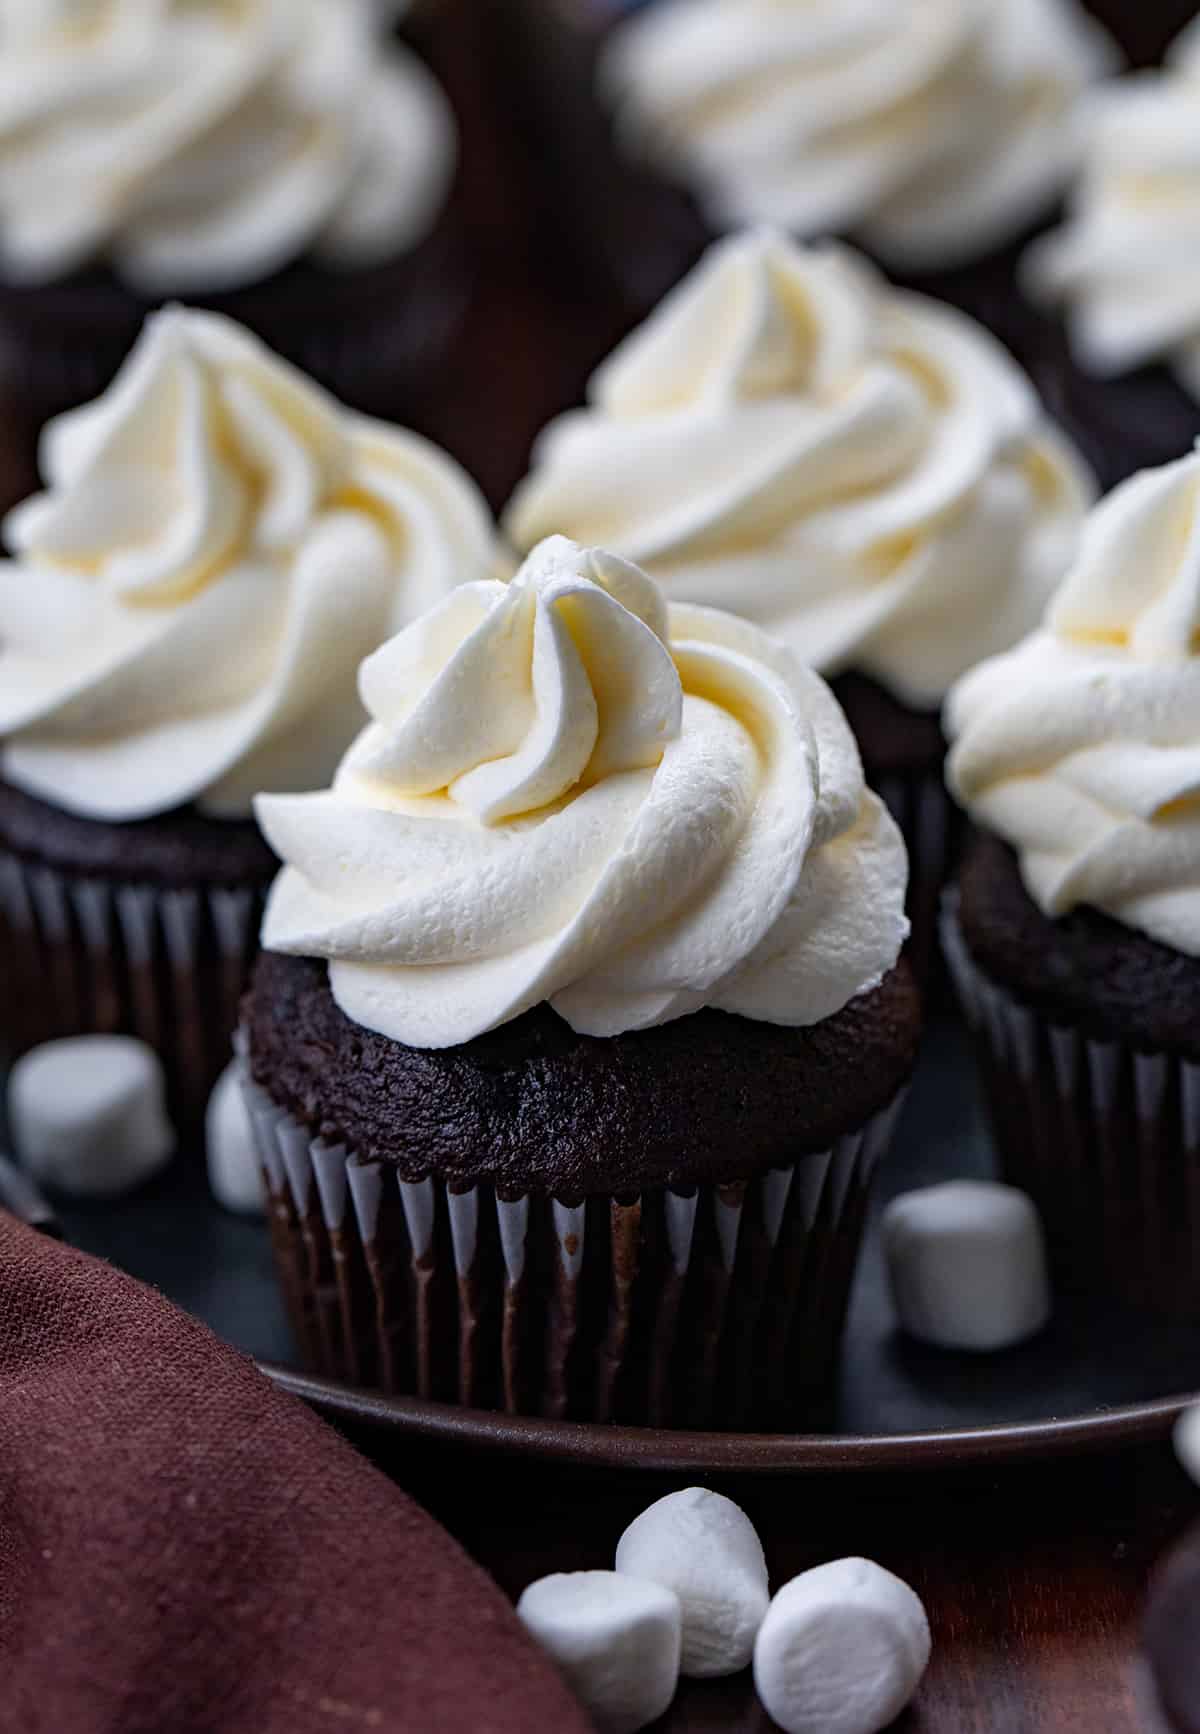 Chocolate Cupcakes with Piped Marshmallow Buttercream on them. 